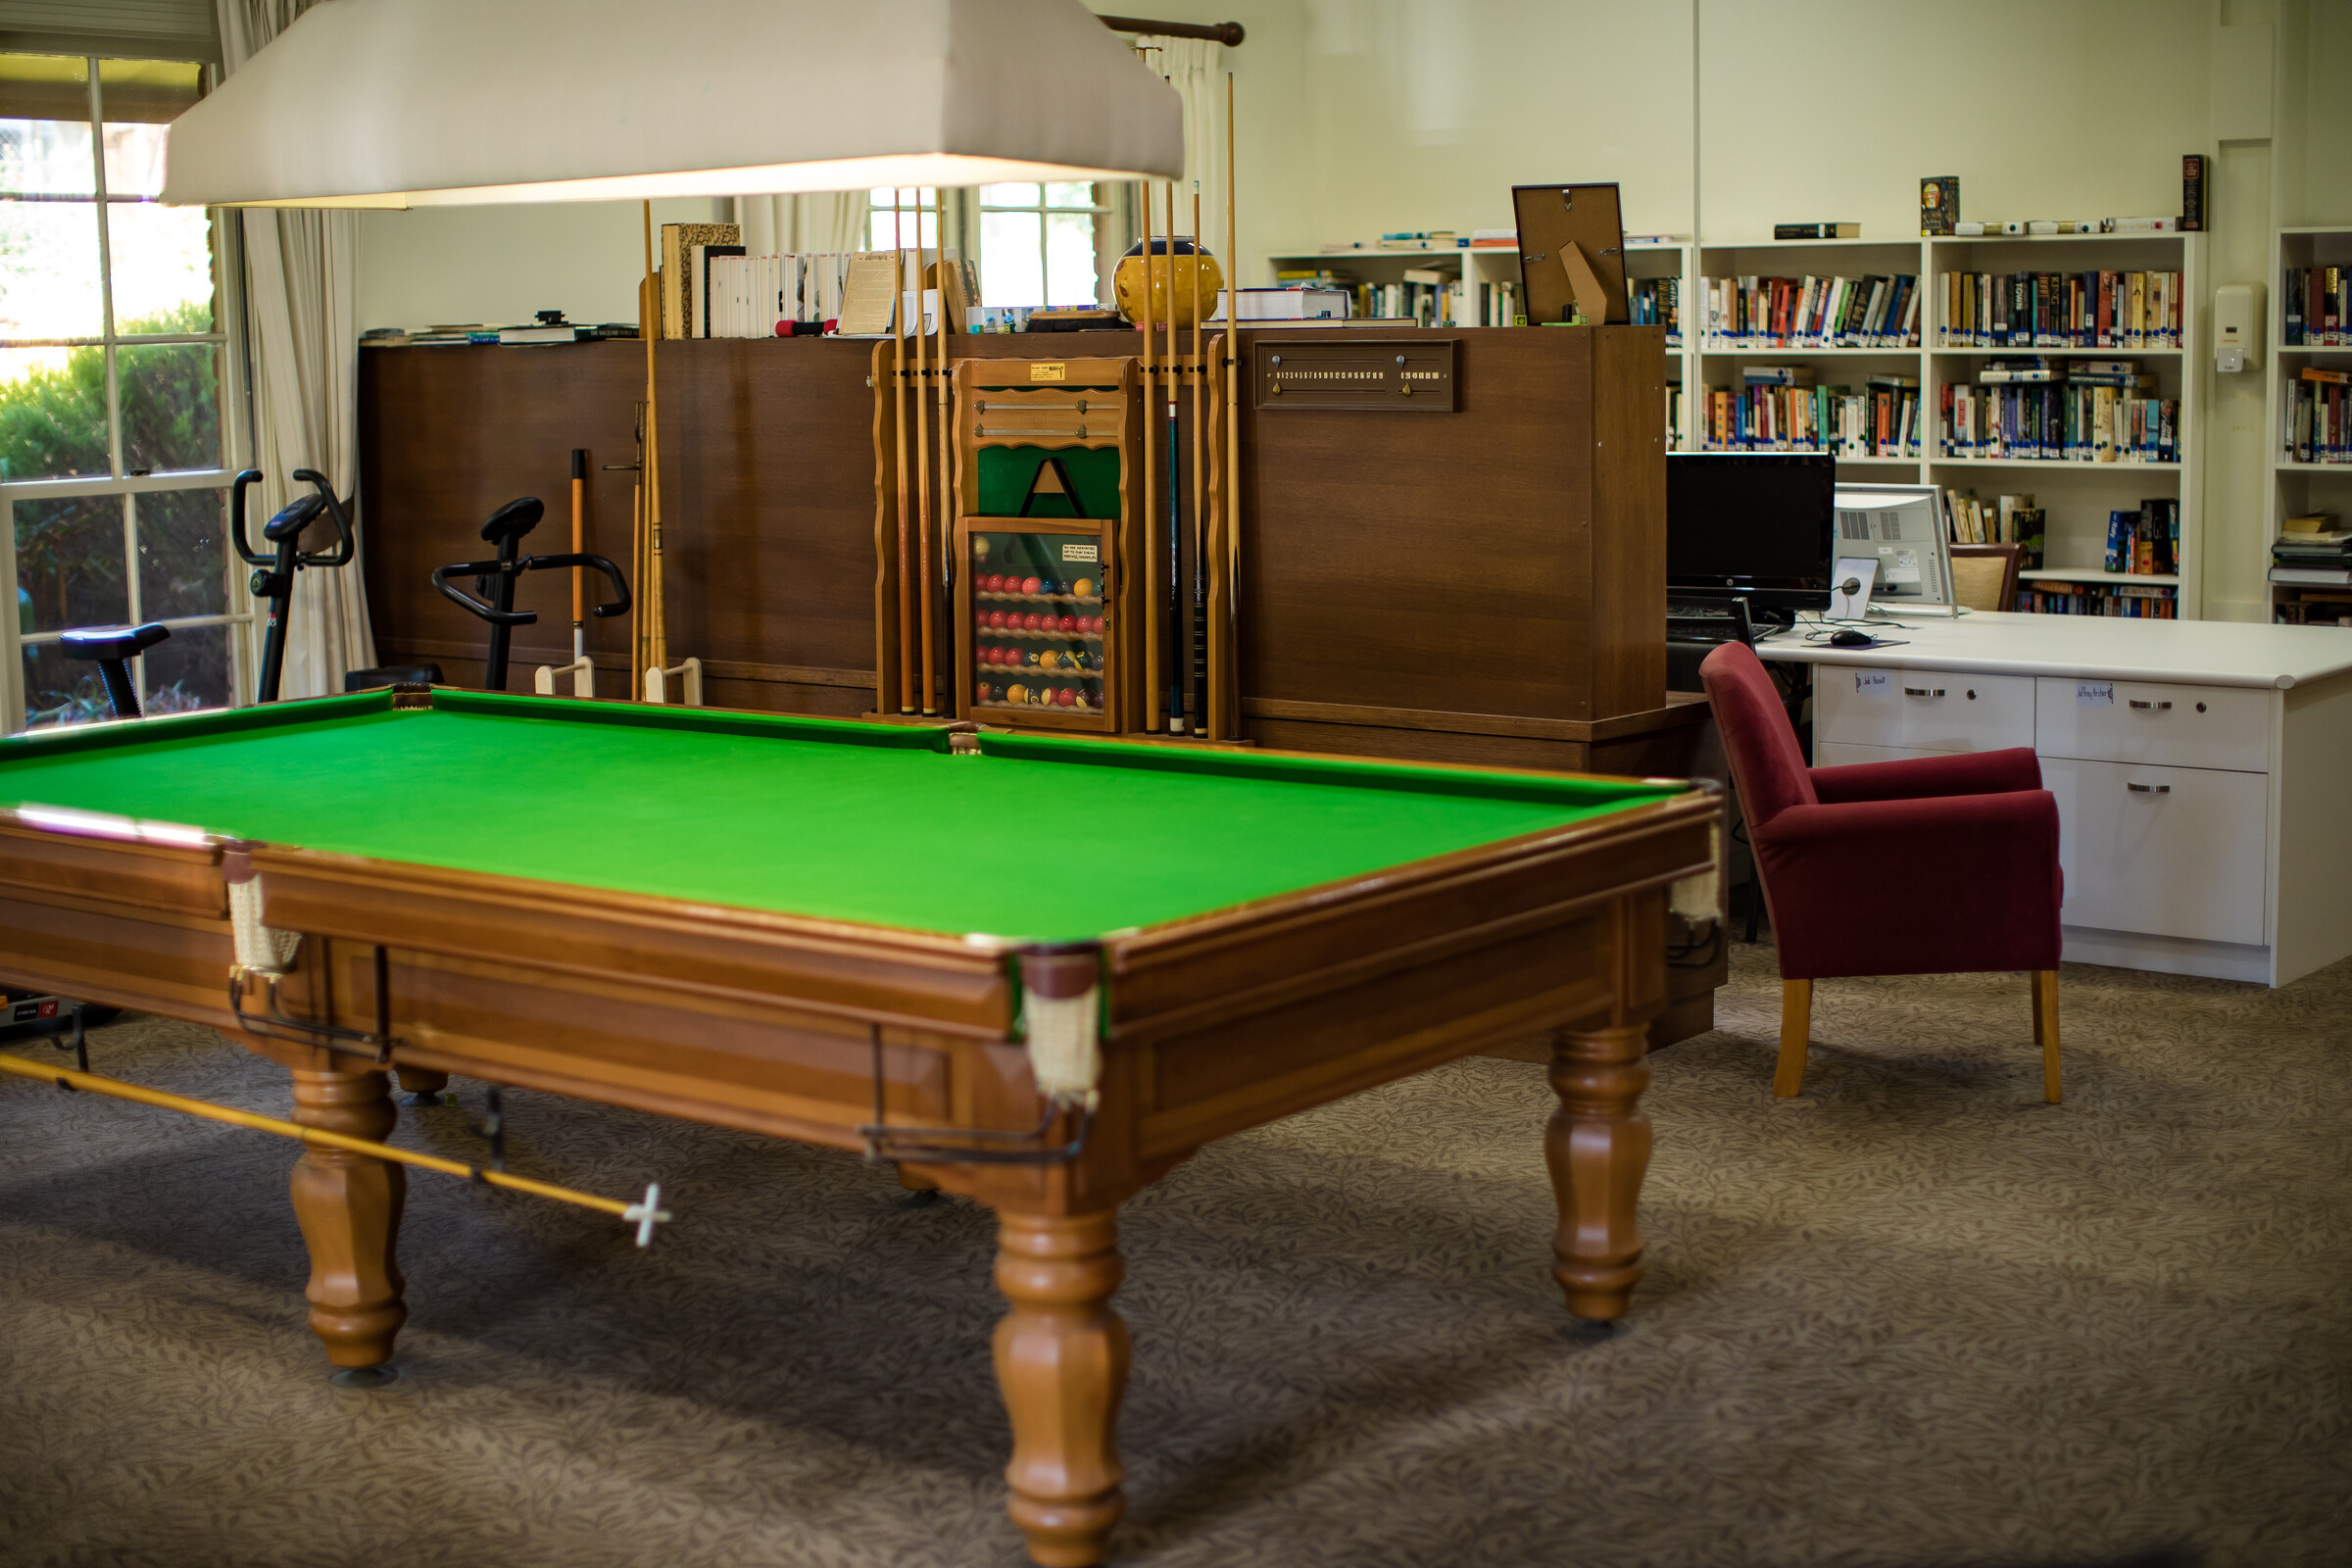 Fiddlers Green pool table with library in background